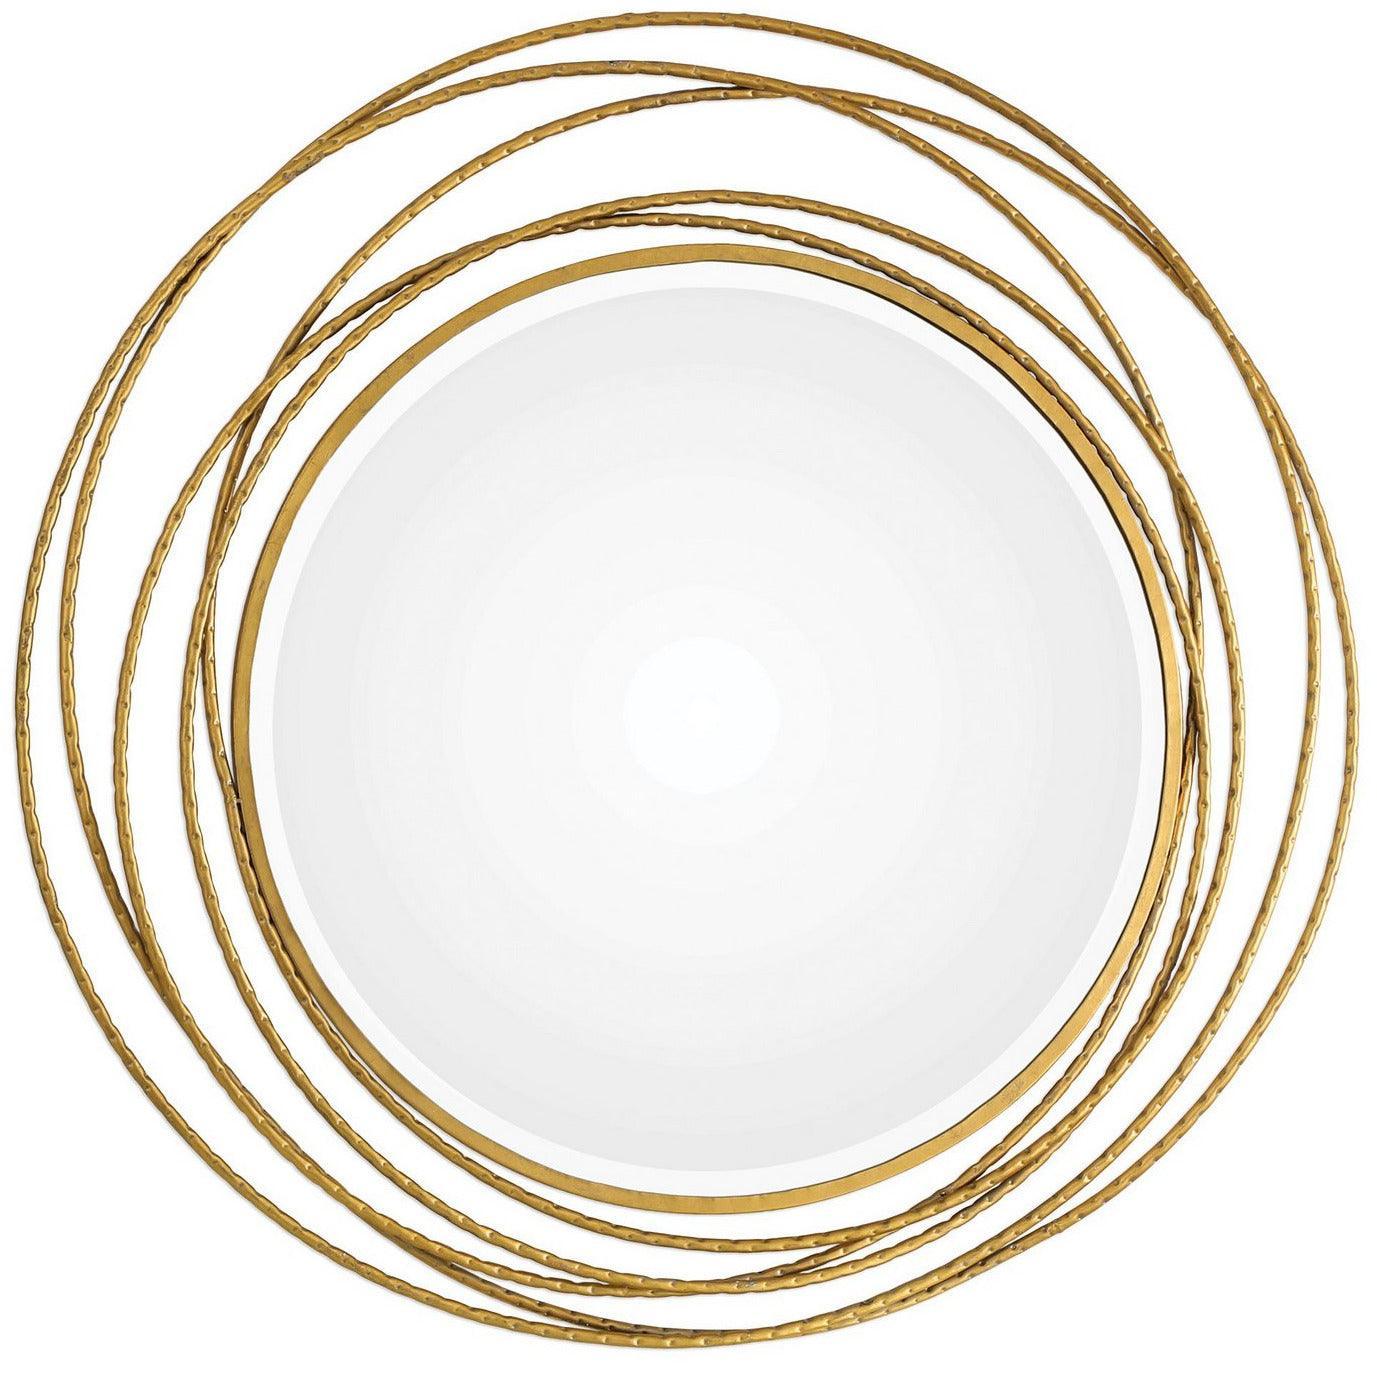 The Uttermost - Whirlwind Mirror - 09348 | Montreal Lighting & Hardware